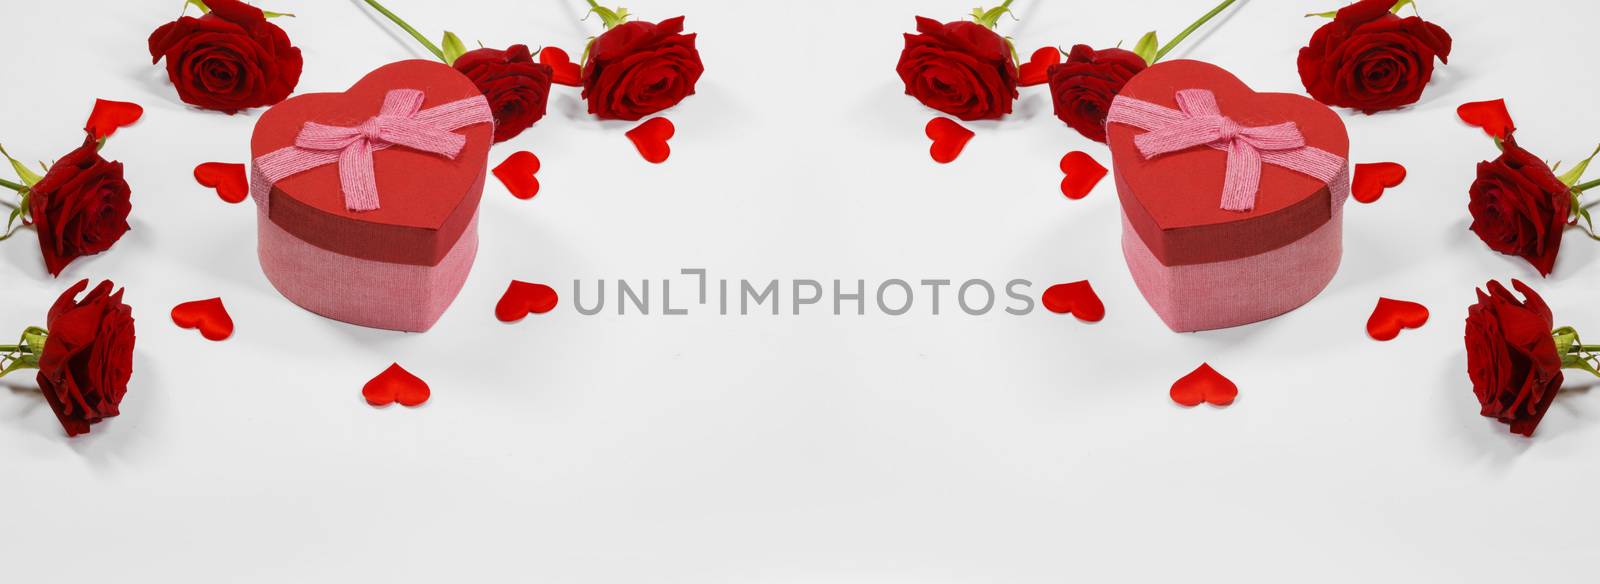 Red heart shaped gift box with roses and paper hearts isolated on white background